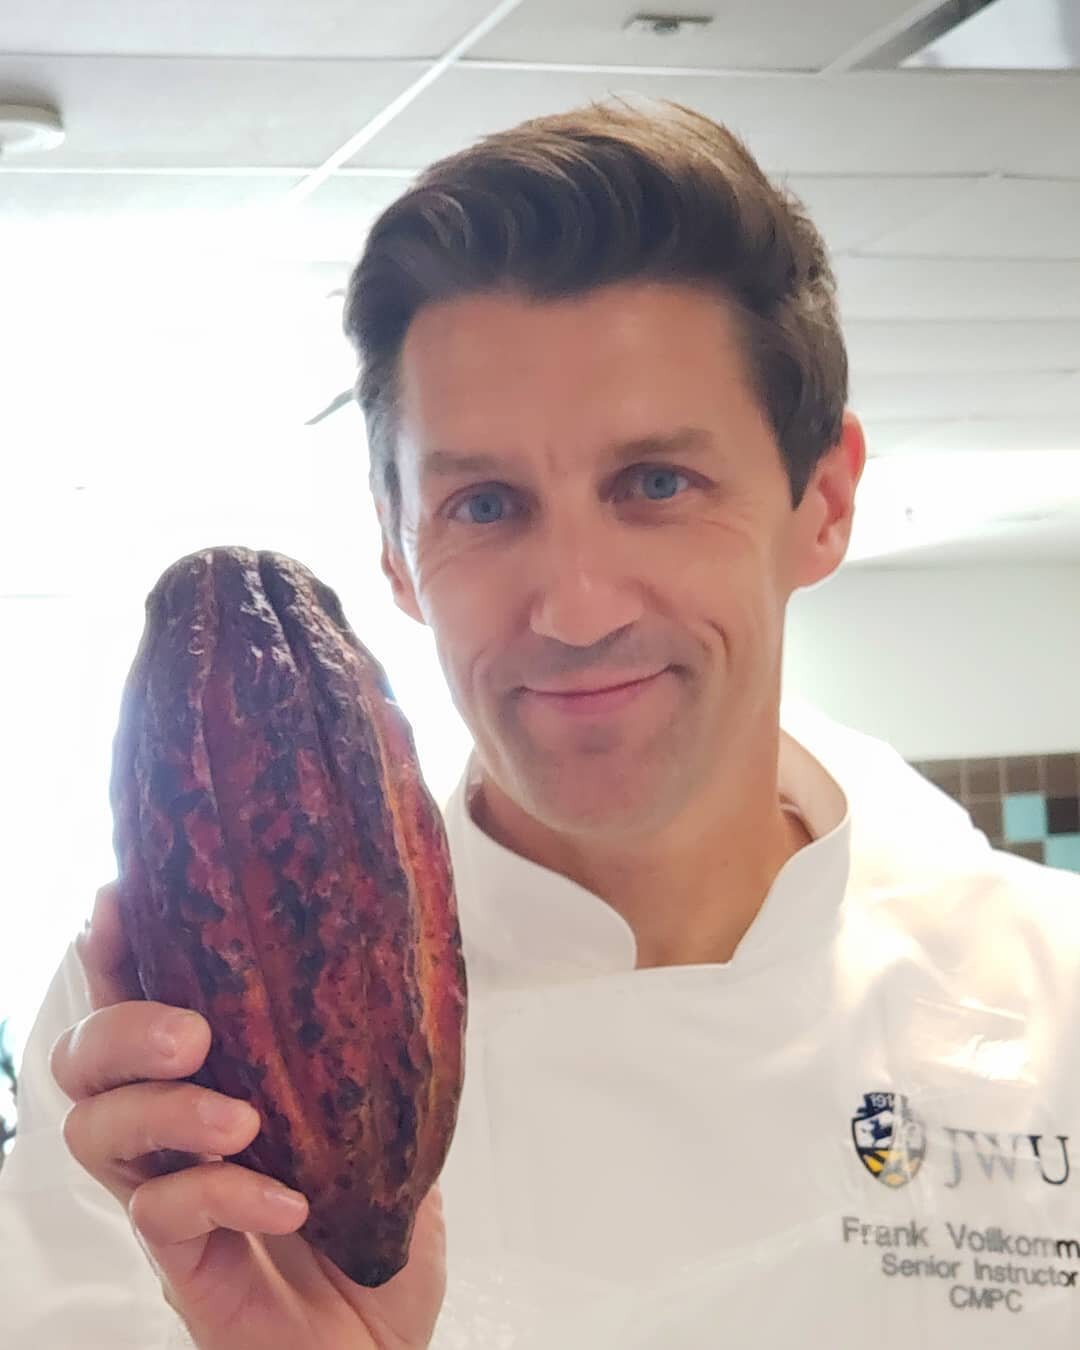 Had the rare opportunity to share a fresh cacao pod with my students.. #chocolate #cacao #bakingandpastryarts #beantobar #chocolatier @jwuculinarynow @laurenvhaas